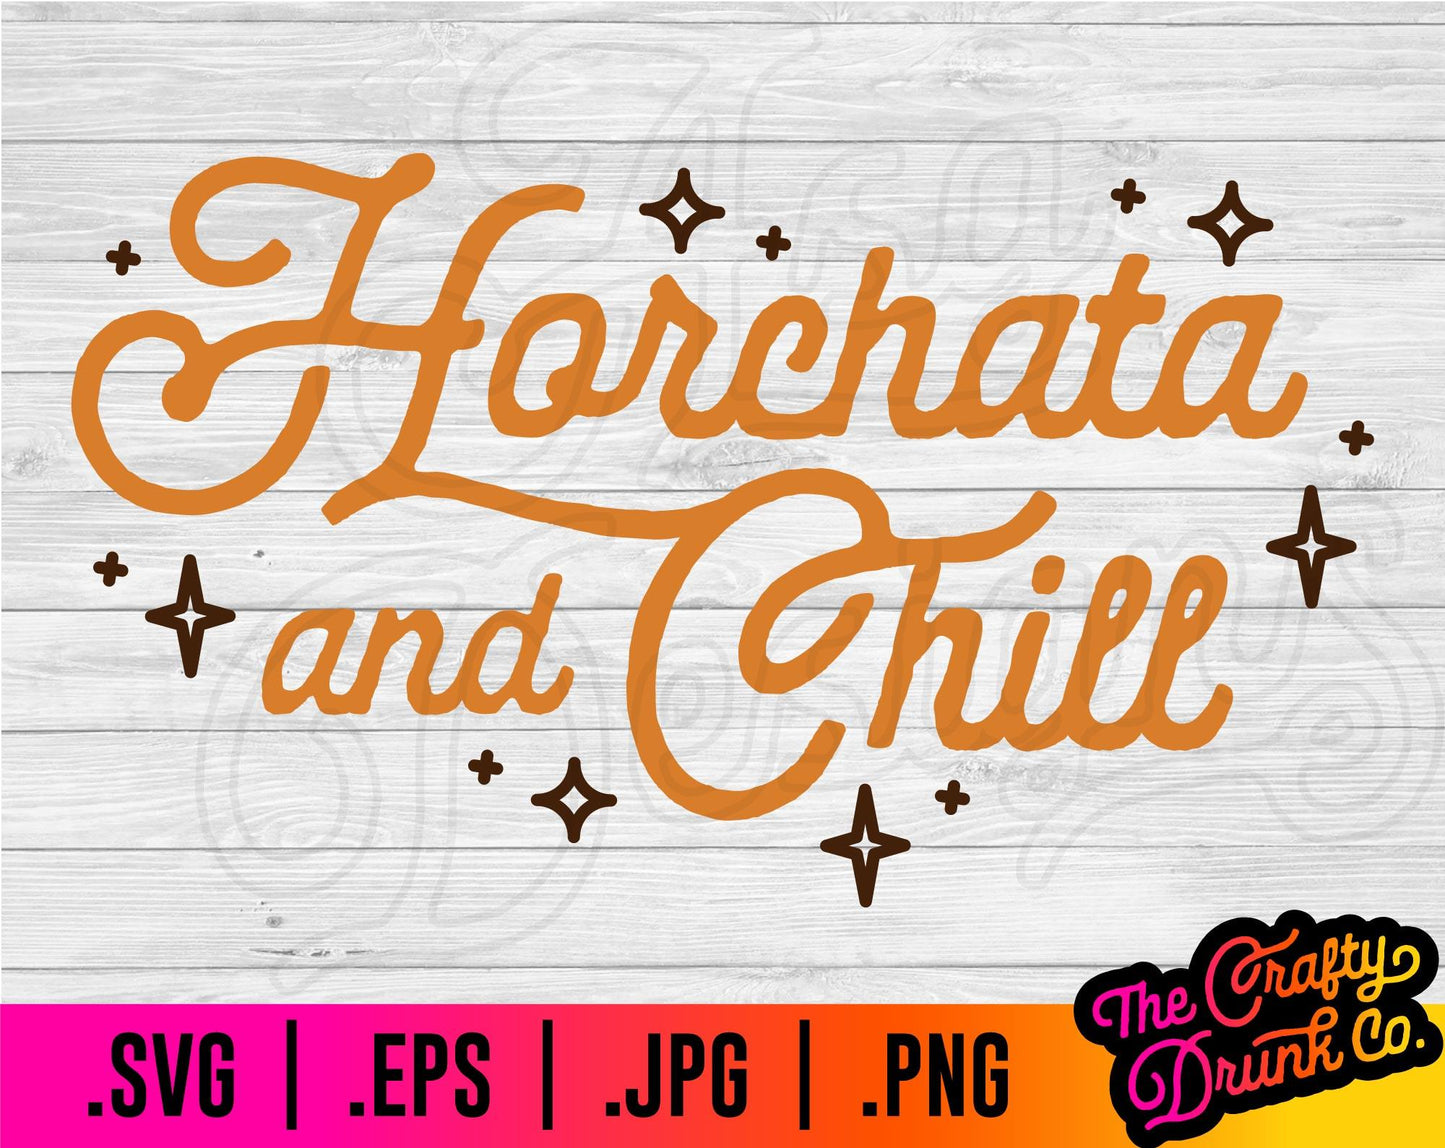 Horchata and Chill - TheCraftyDrunkCo